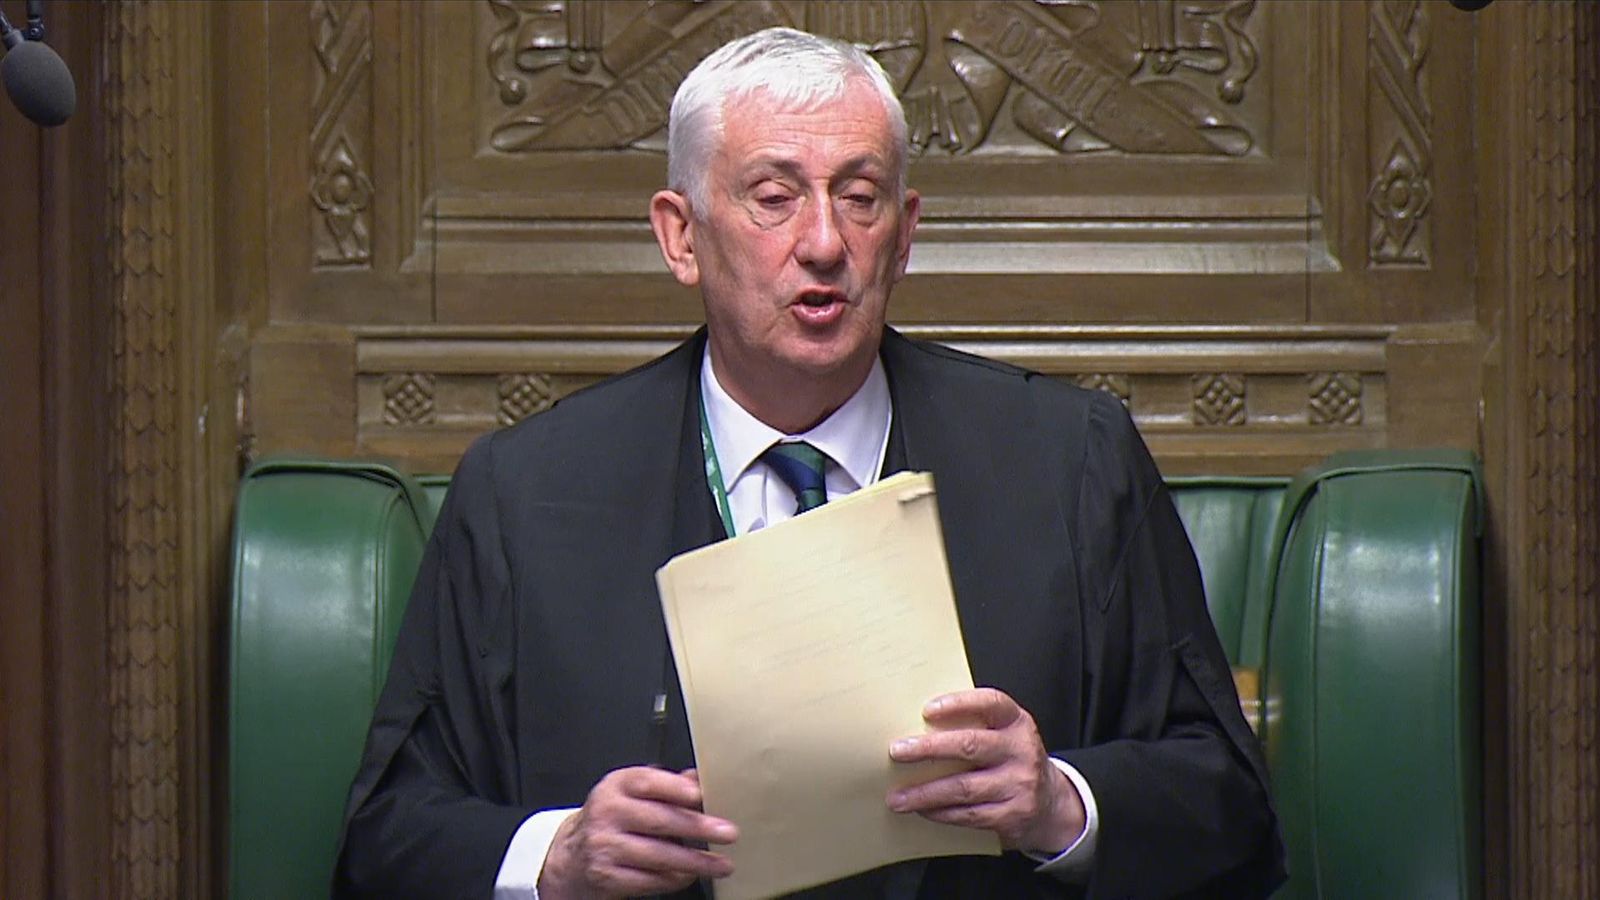 Emotional Speaker Sir Lindsay Hoyle says he is ‘guilty of looking after MPs’ facing ‘frightening’ threats | Politics News